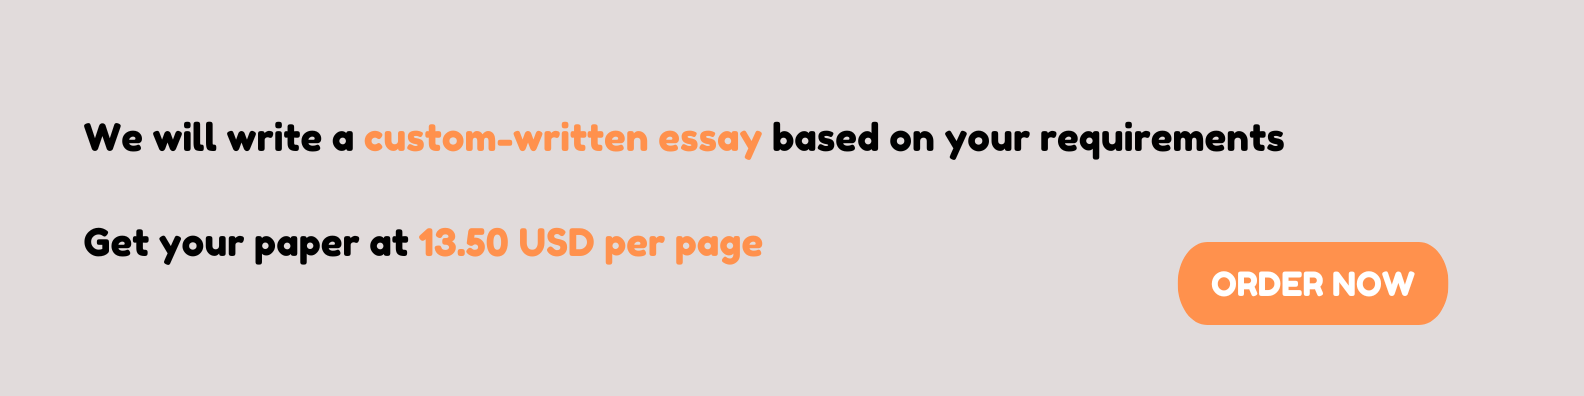 get custom written essays from professional writers at affordable rates